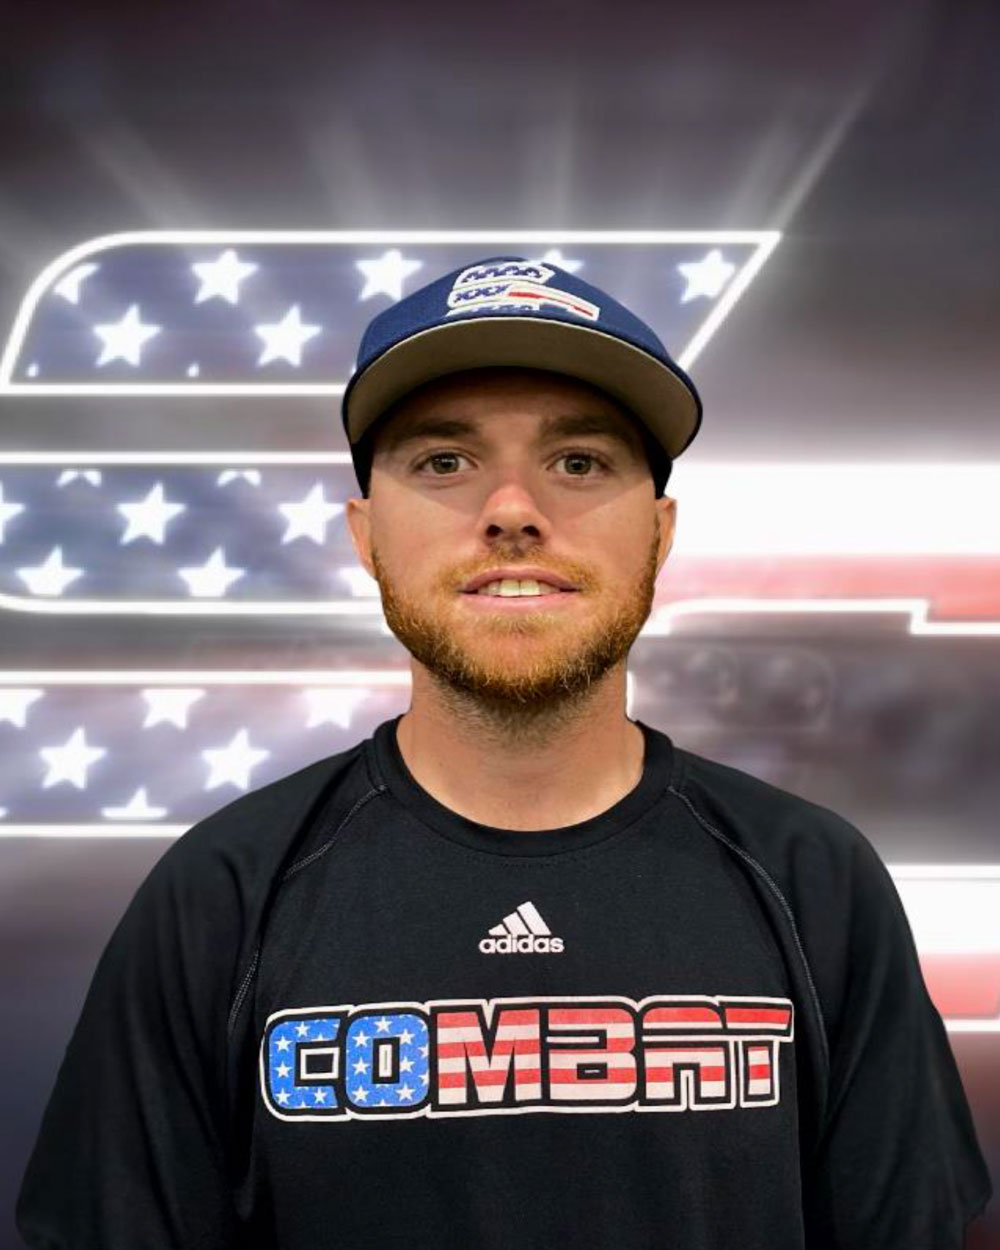 Matt Spillman - Baseball Instructor - Call today for availability for private lessons.